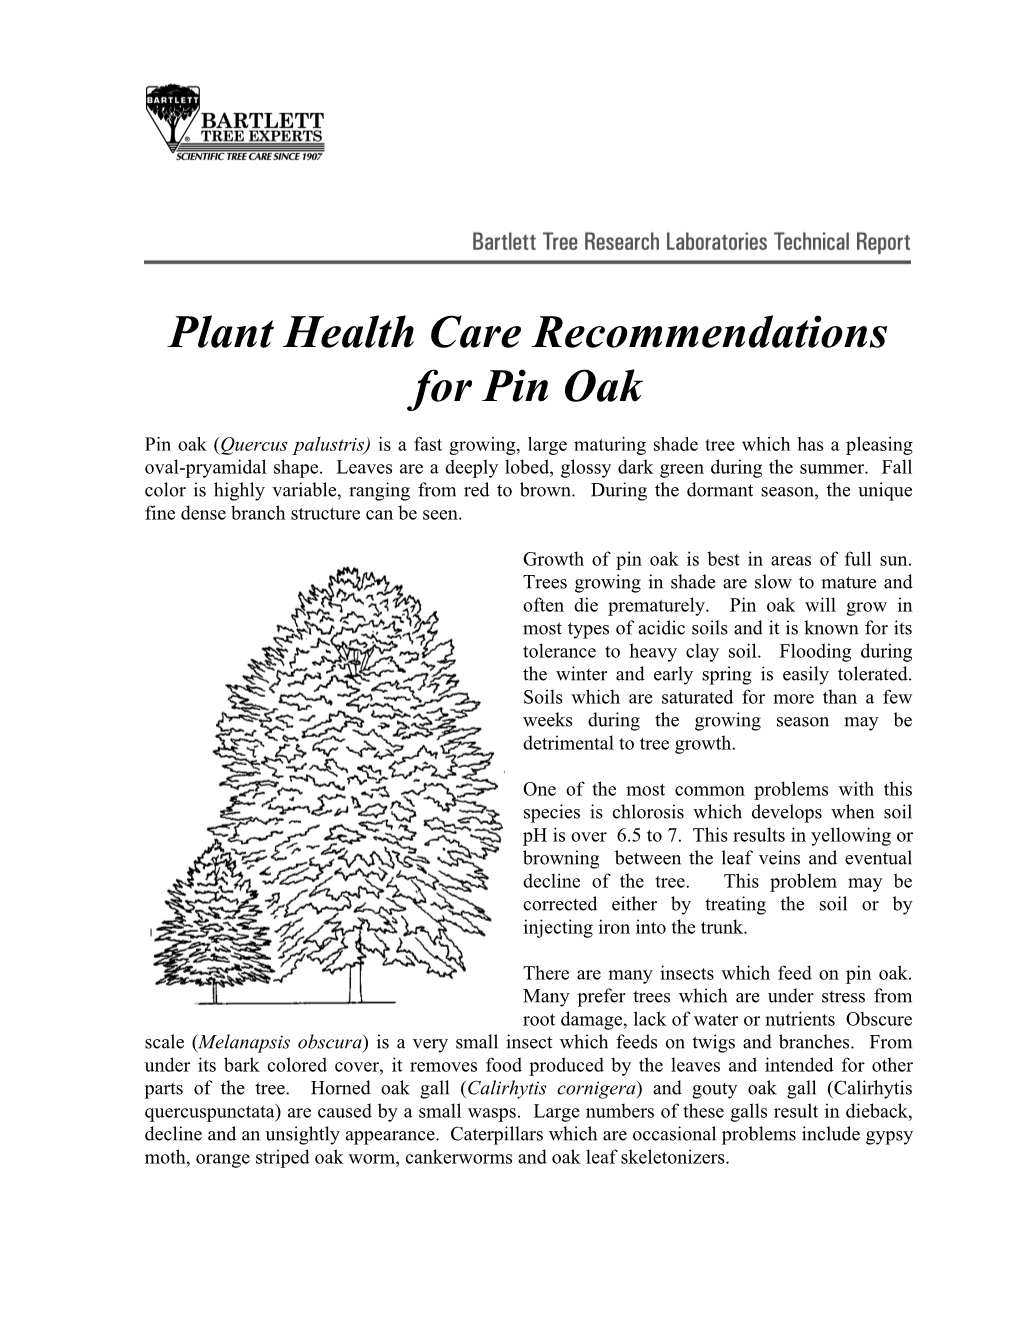 Plant Health Care Recommendations for Pin Oak